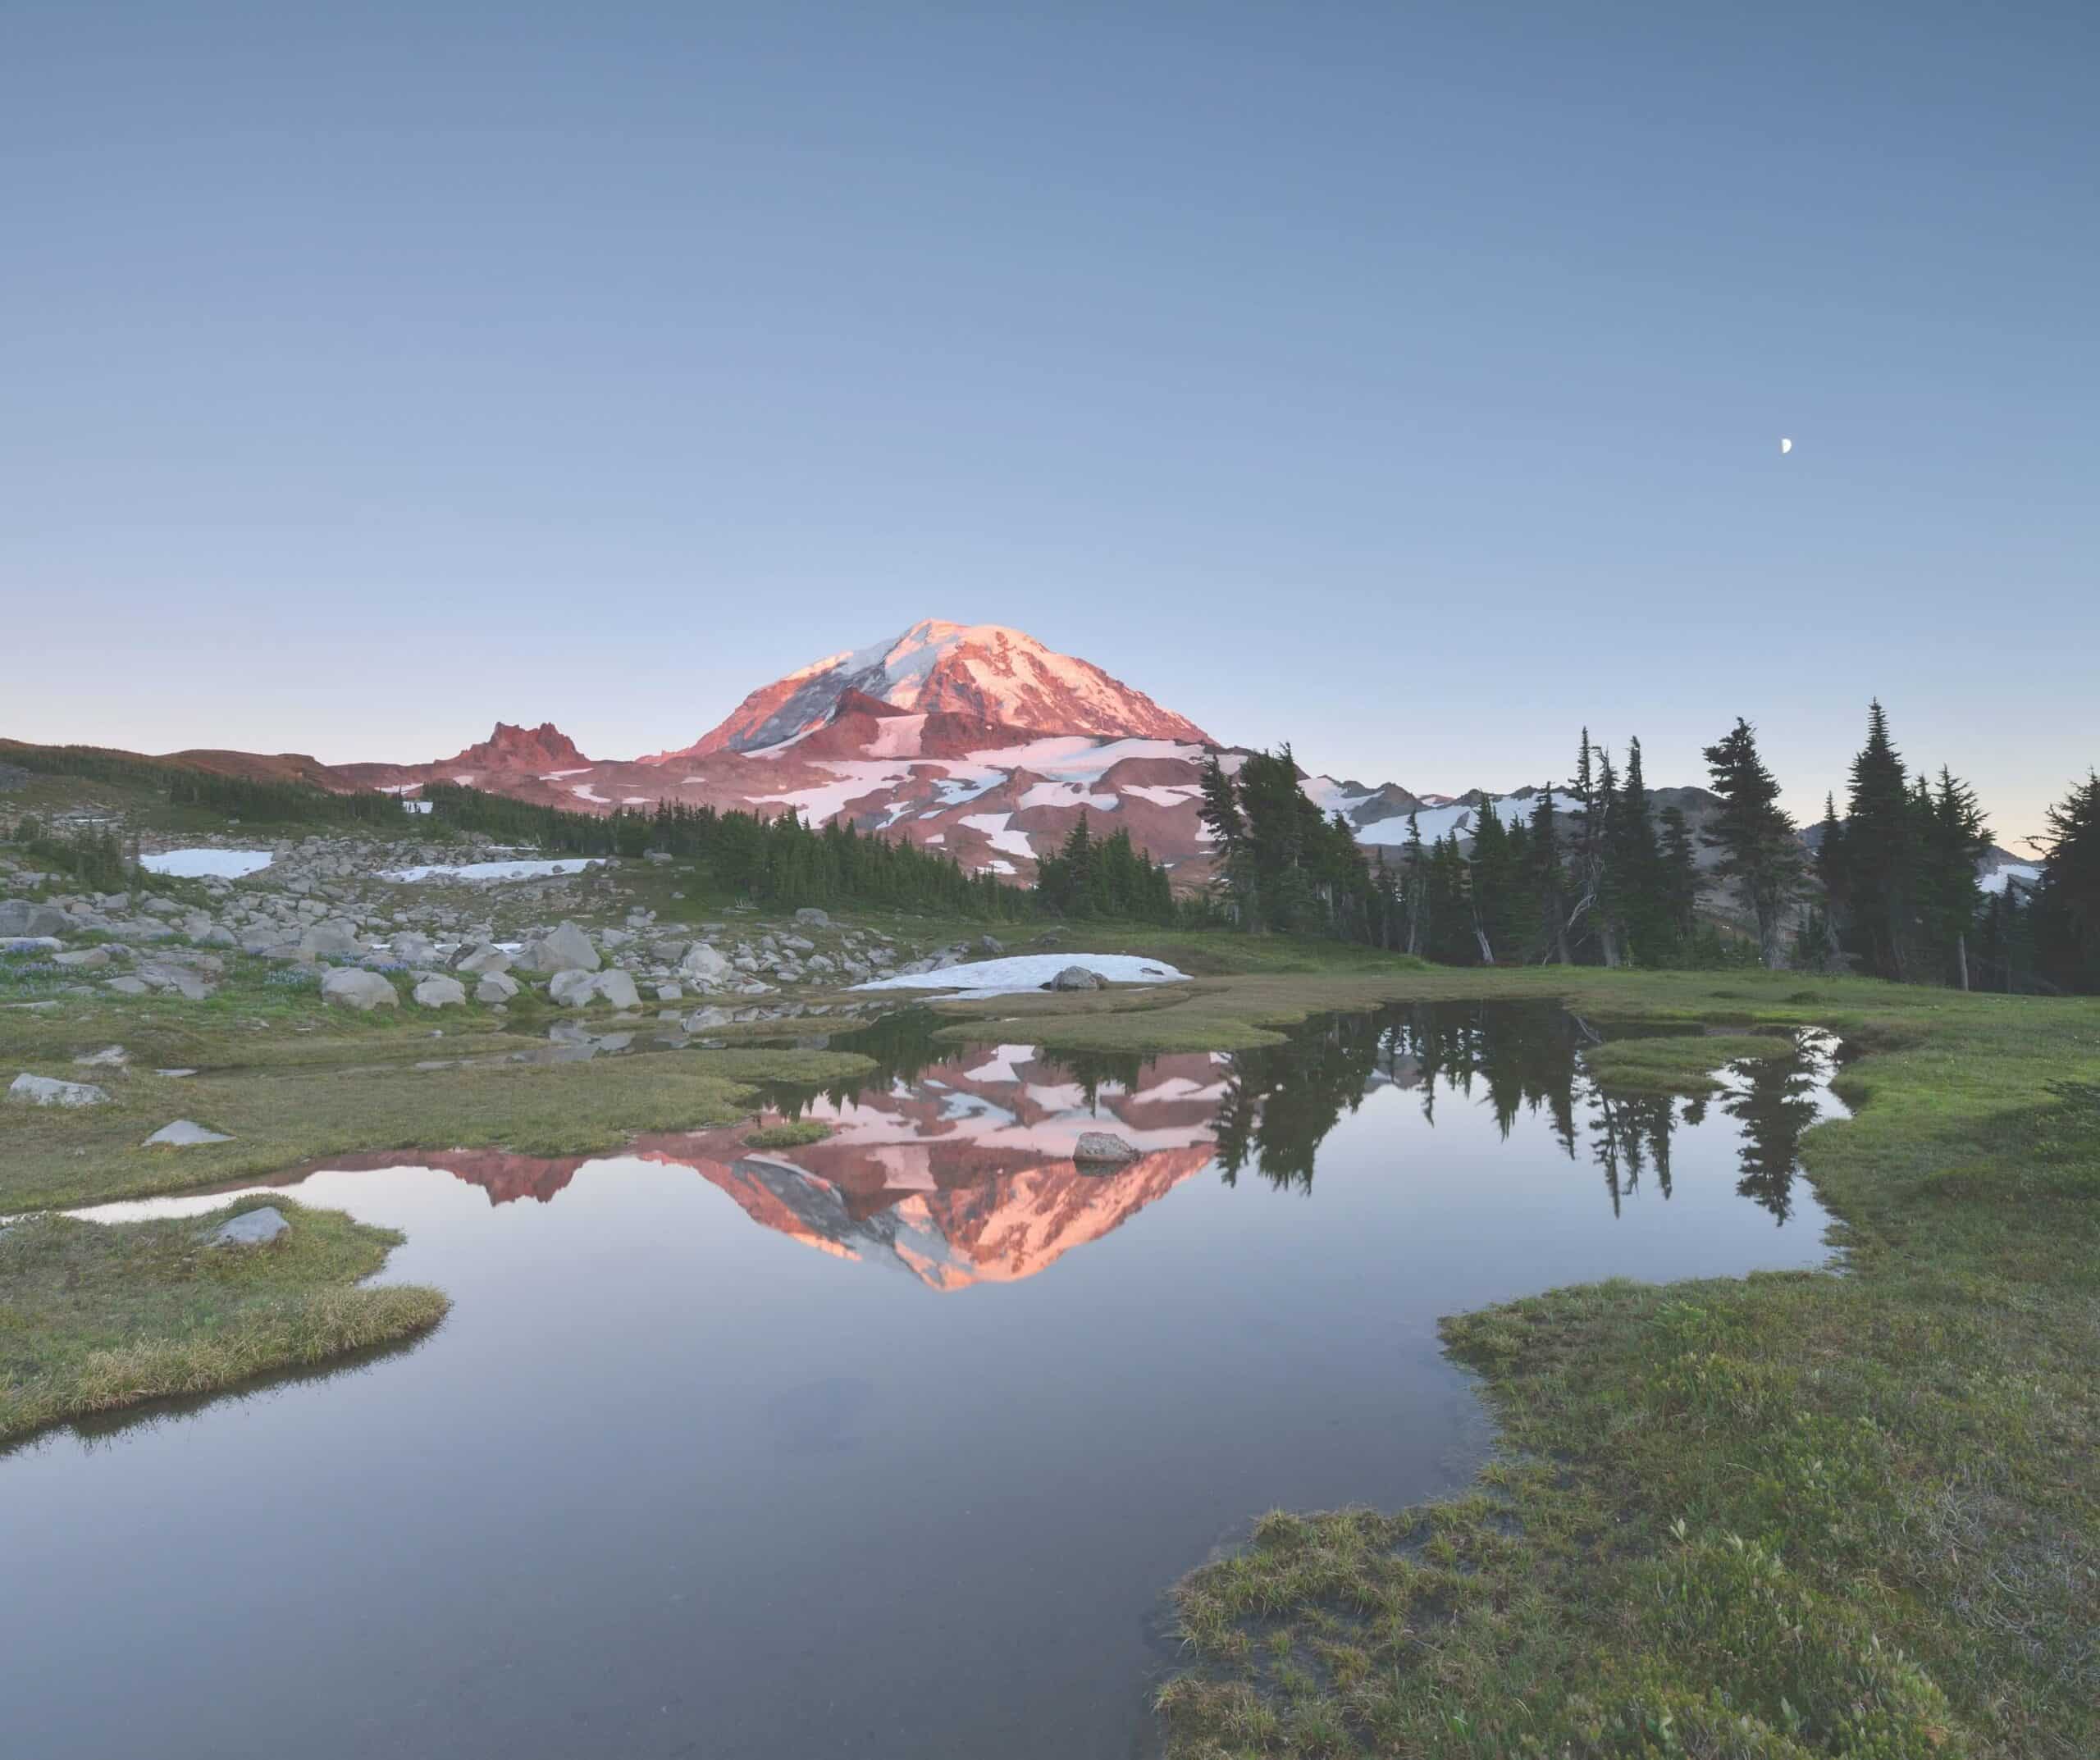 Mount Rainier National Park - Private Luxury Day Tour with Lunch